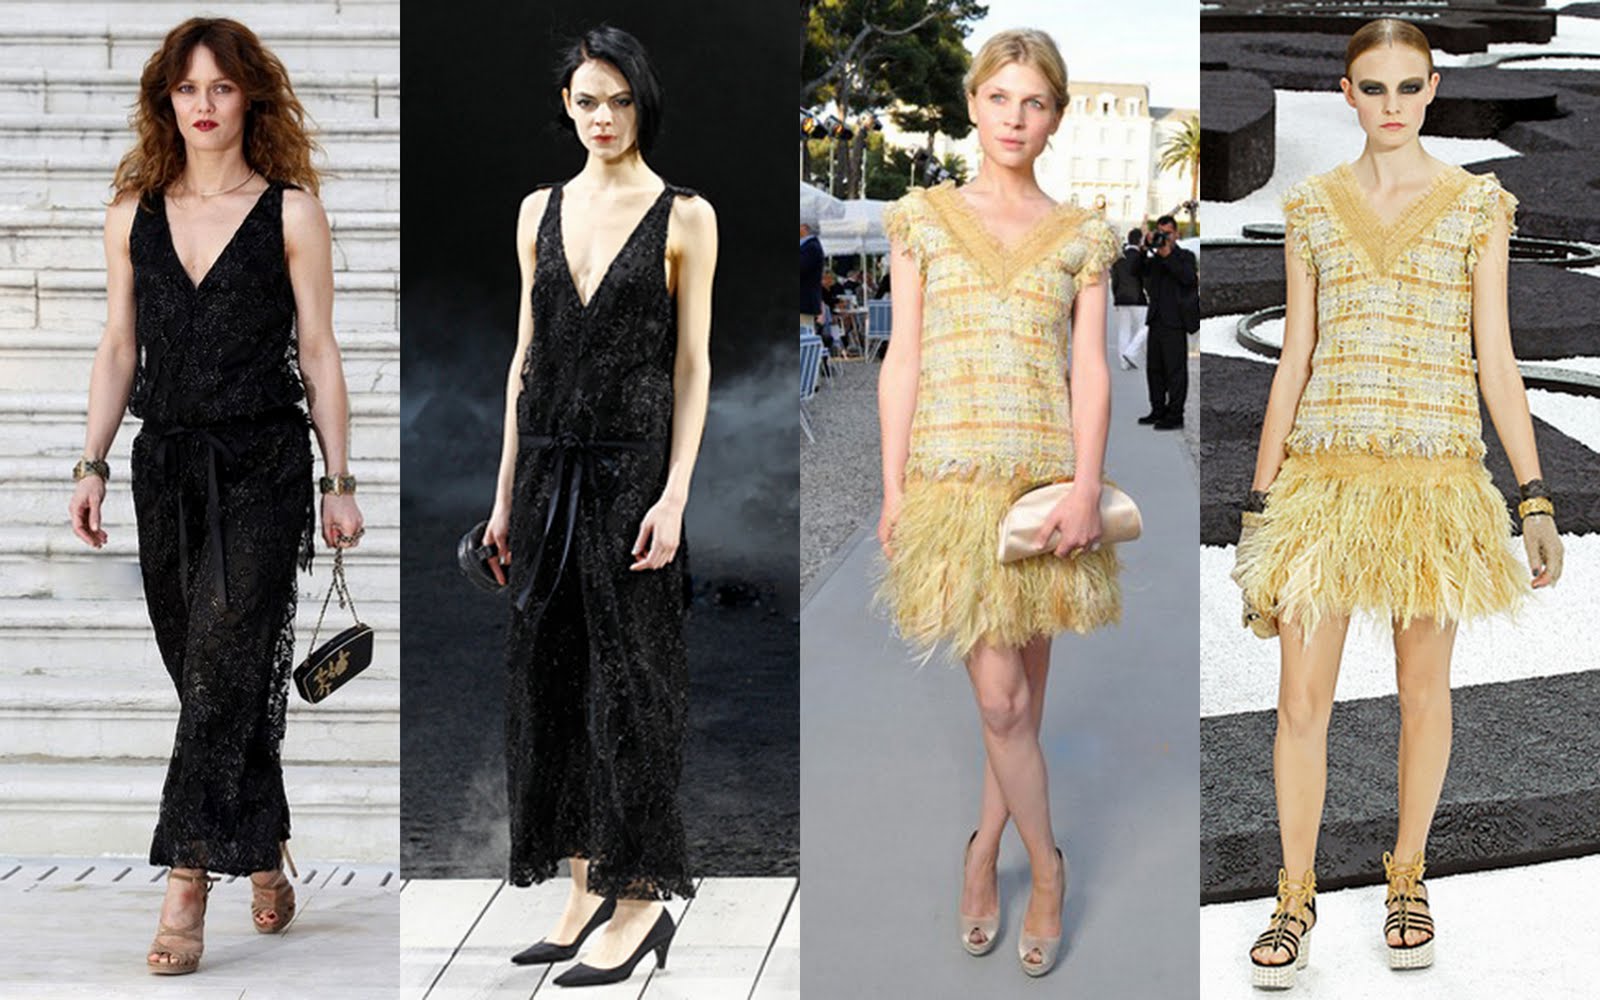 Chanel Resort 2012 Collection Photos - Vogue